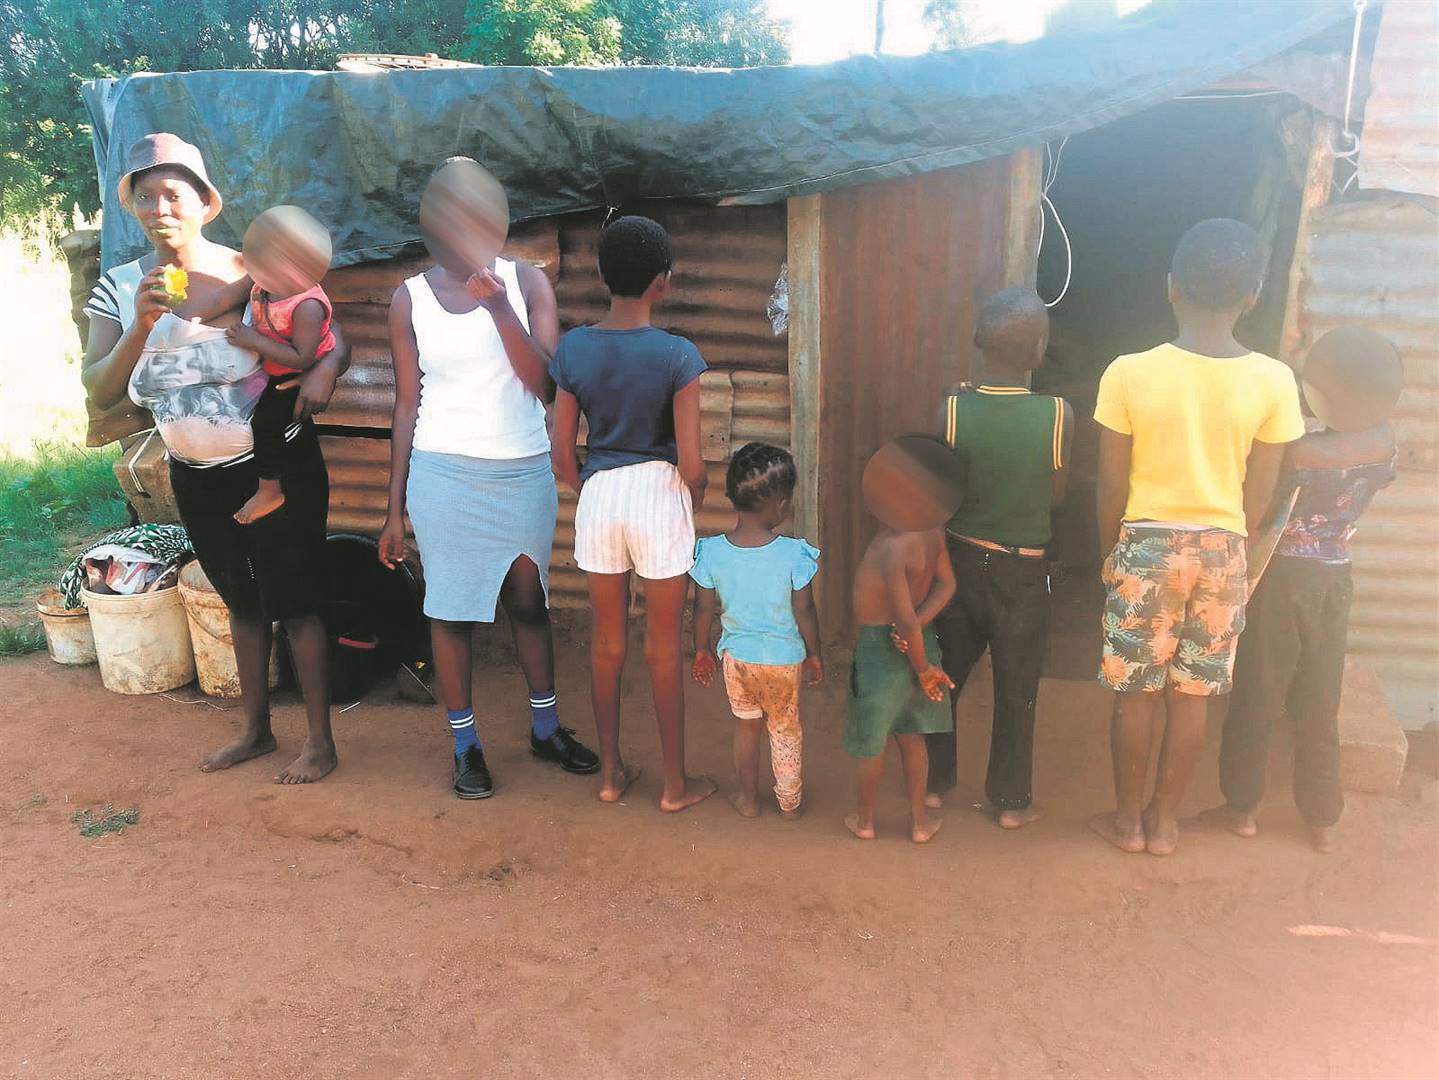 The family members outside their zinc shack. Photo by Oris Mnisi